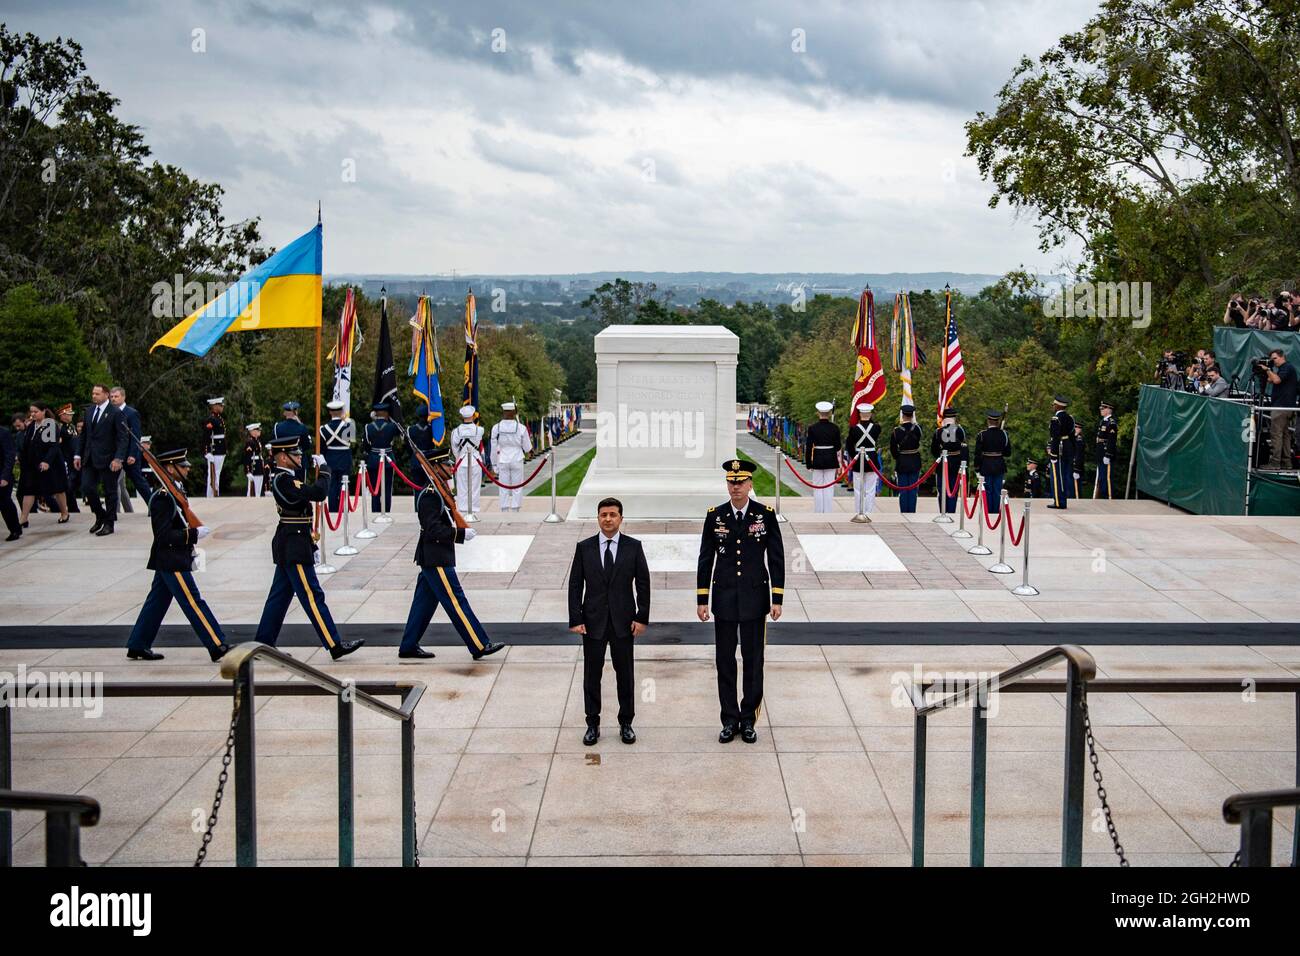 Ukrainian President Volodymyr Zelenskyy, left, is escorted by U.S. Army Maj. Gen. Allan Pepin during a full honors wreath laying ceremony at the Tomb of the Unknown Soldier at Arlington National Cemetery September 1, 2021 in Arlington, Virginia. Stock Photo